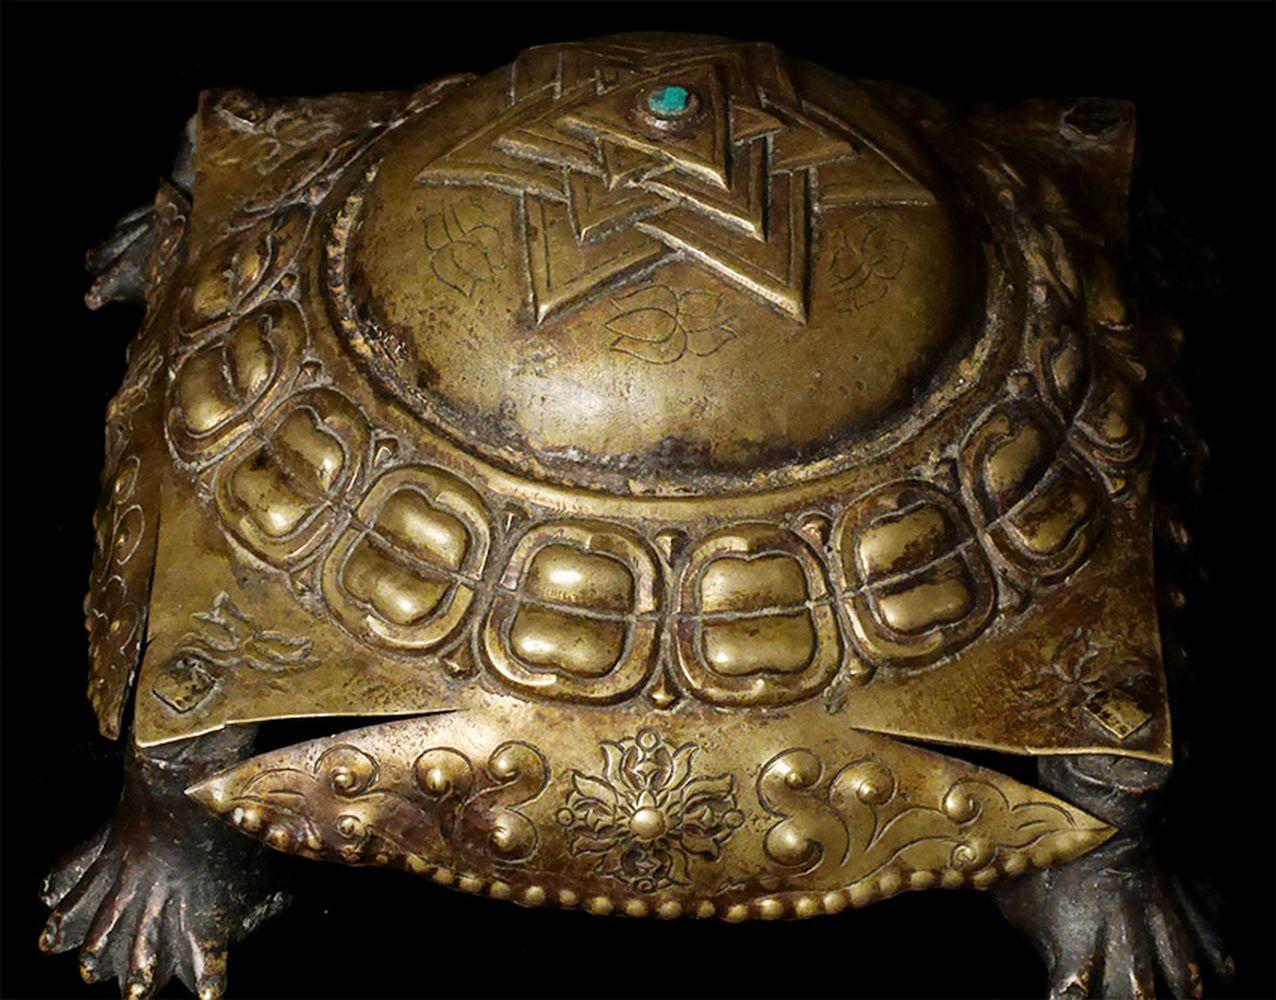 16thC Nepalese Copper Yantra with Solid-Cast Turtle Feet - 8213 In Good Condition For Sale In Ukiah, CA